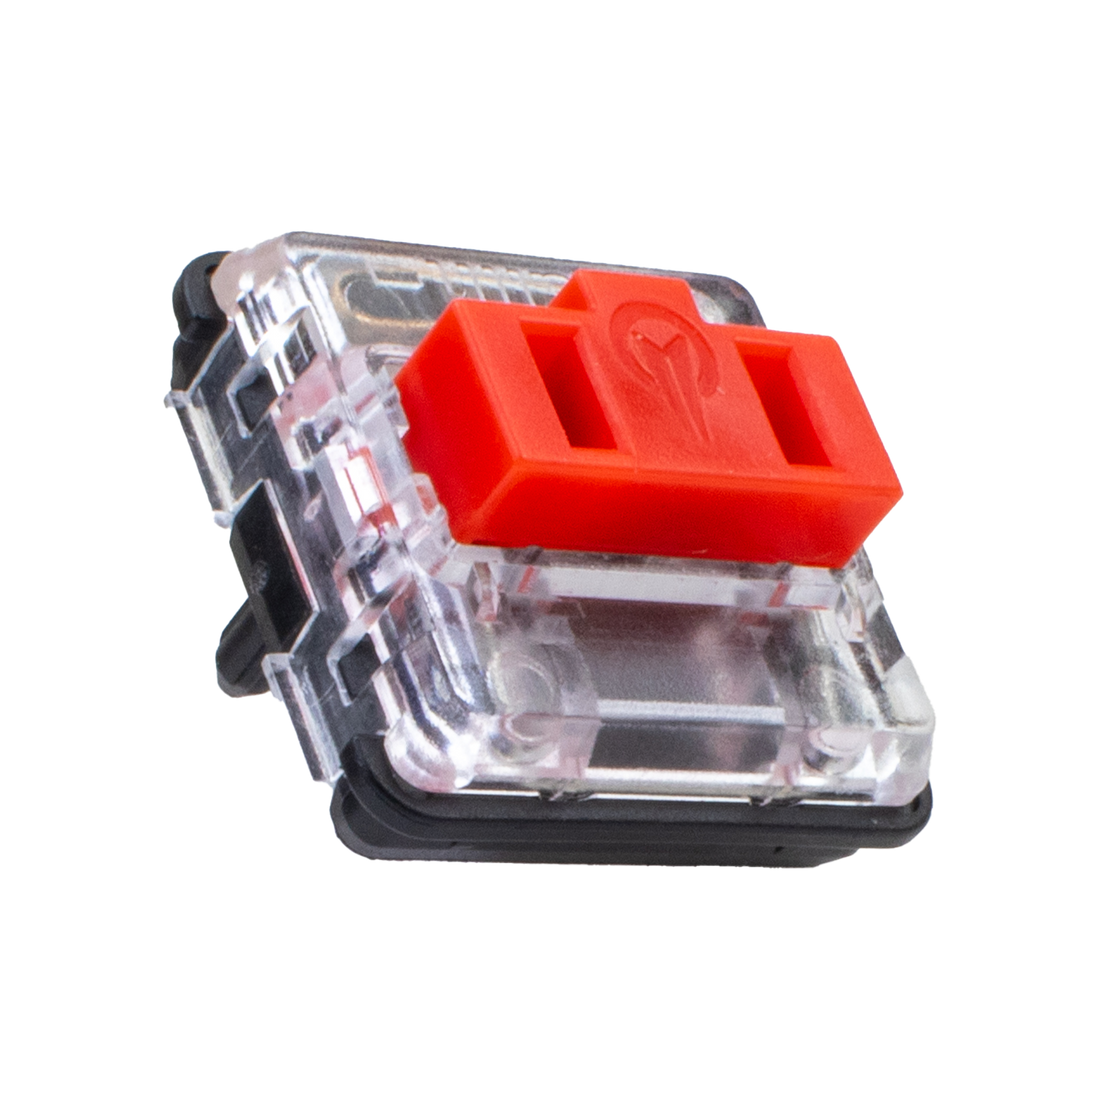 Kailh Choc Low Profile Red Switch